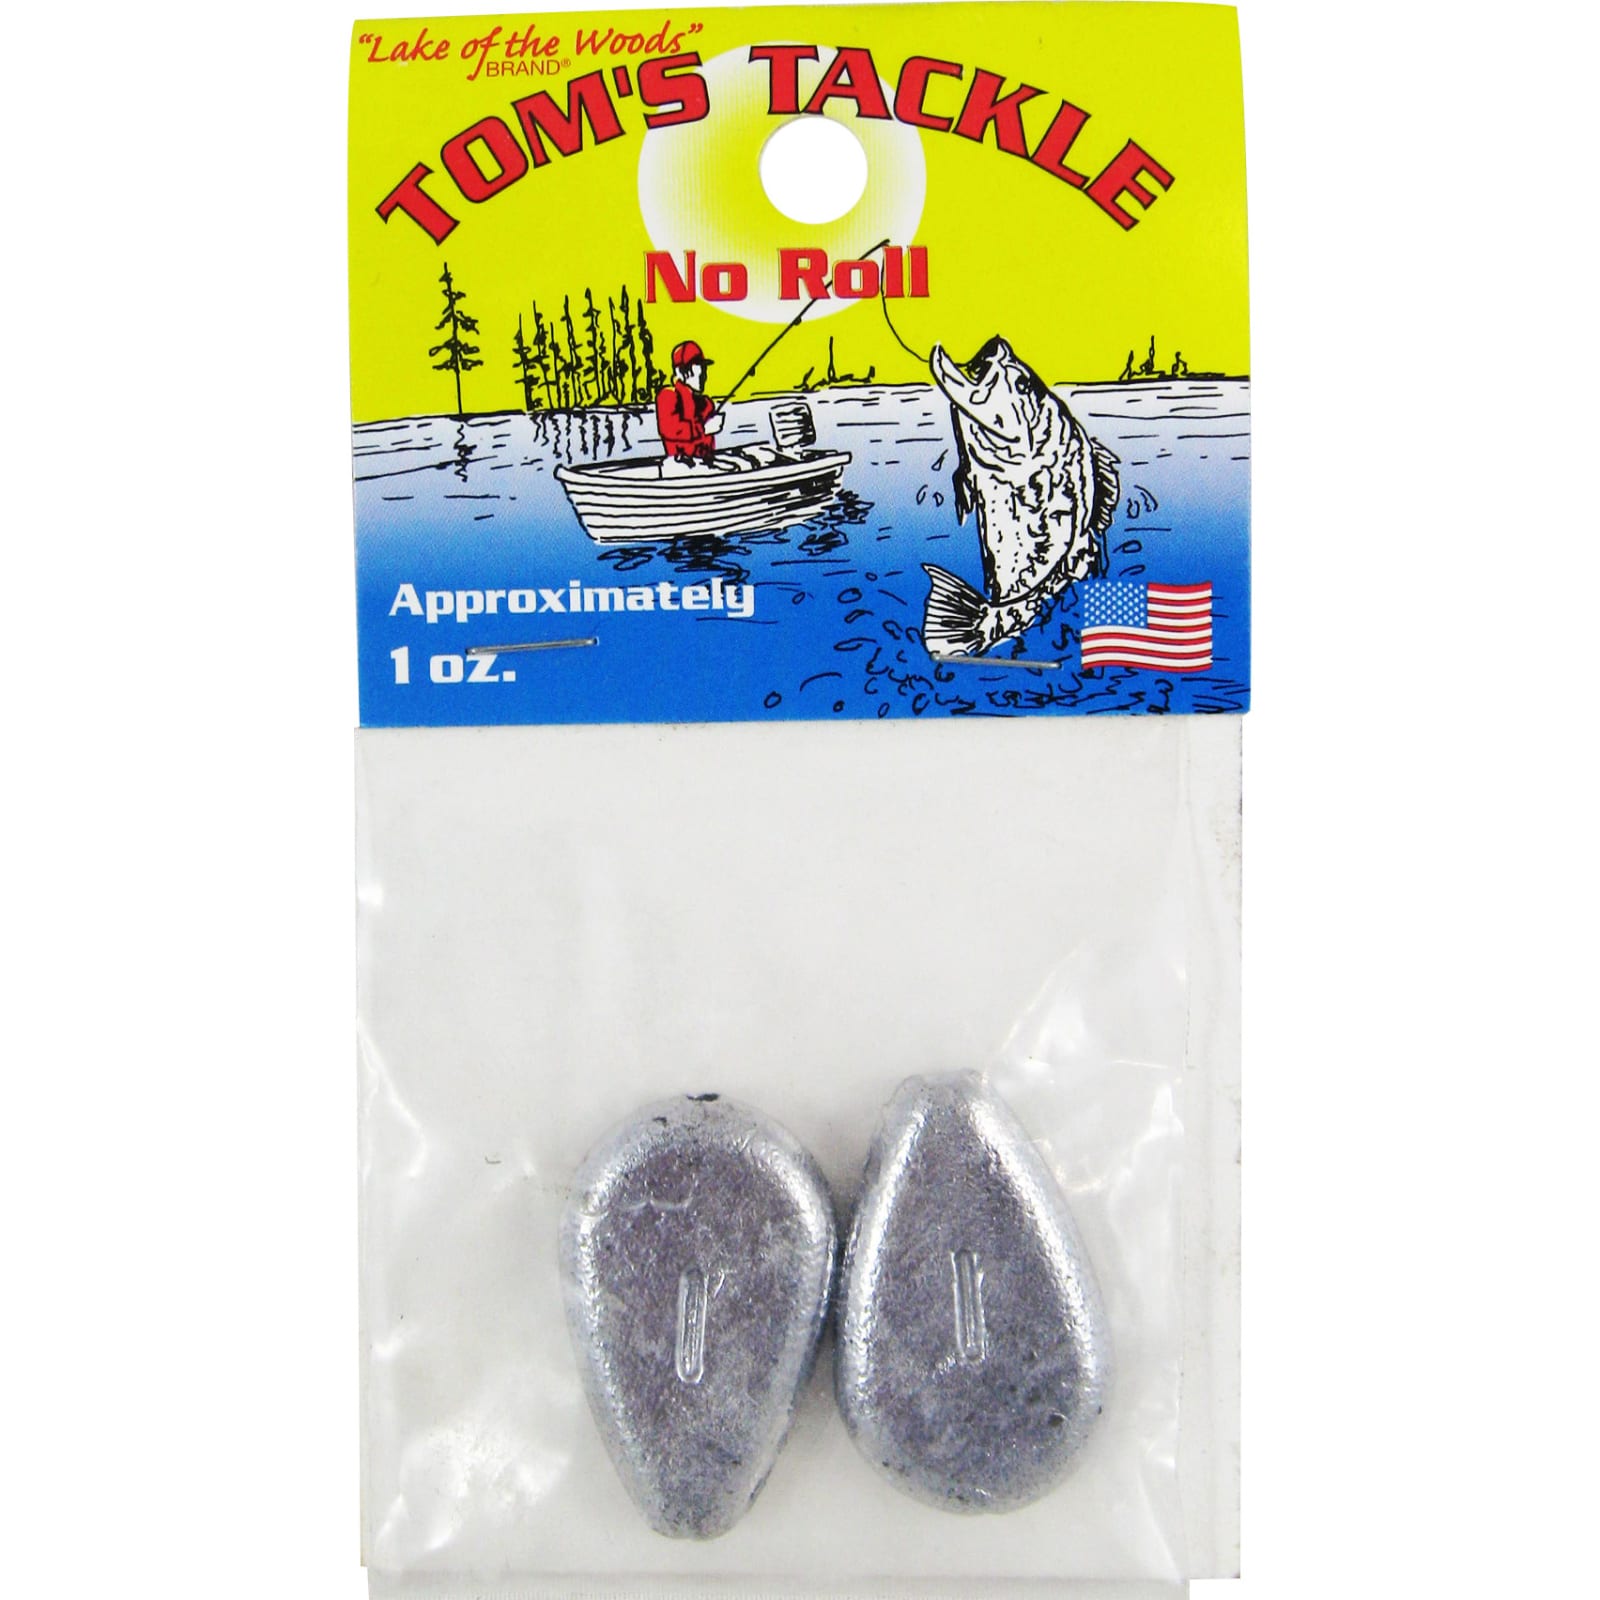 Opti Tackle No Roll River Sinkers - 2 Pack | Size: 1 oz | by Fleet Farm